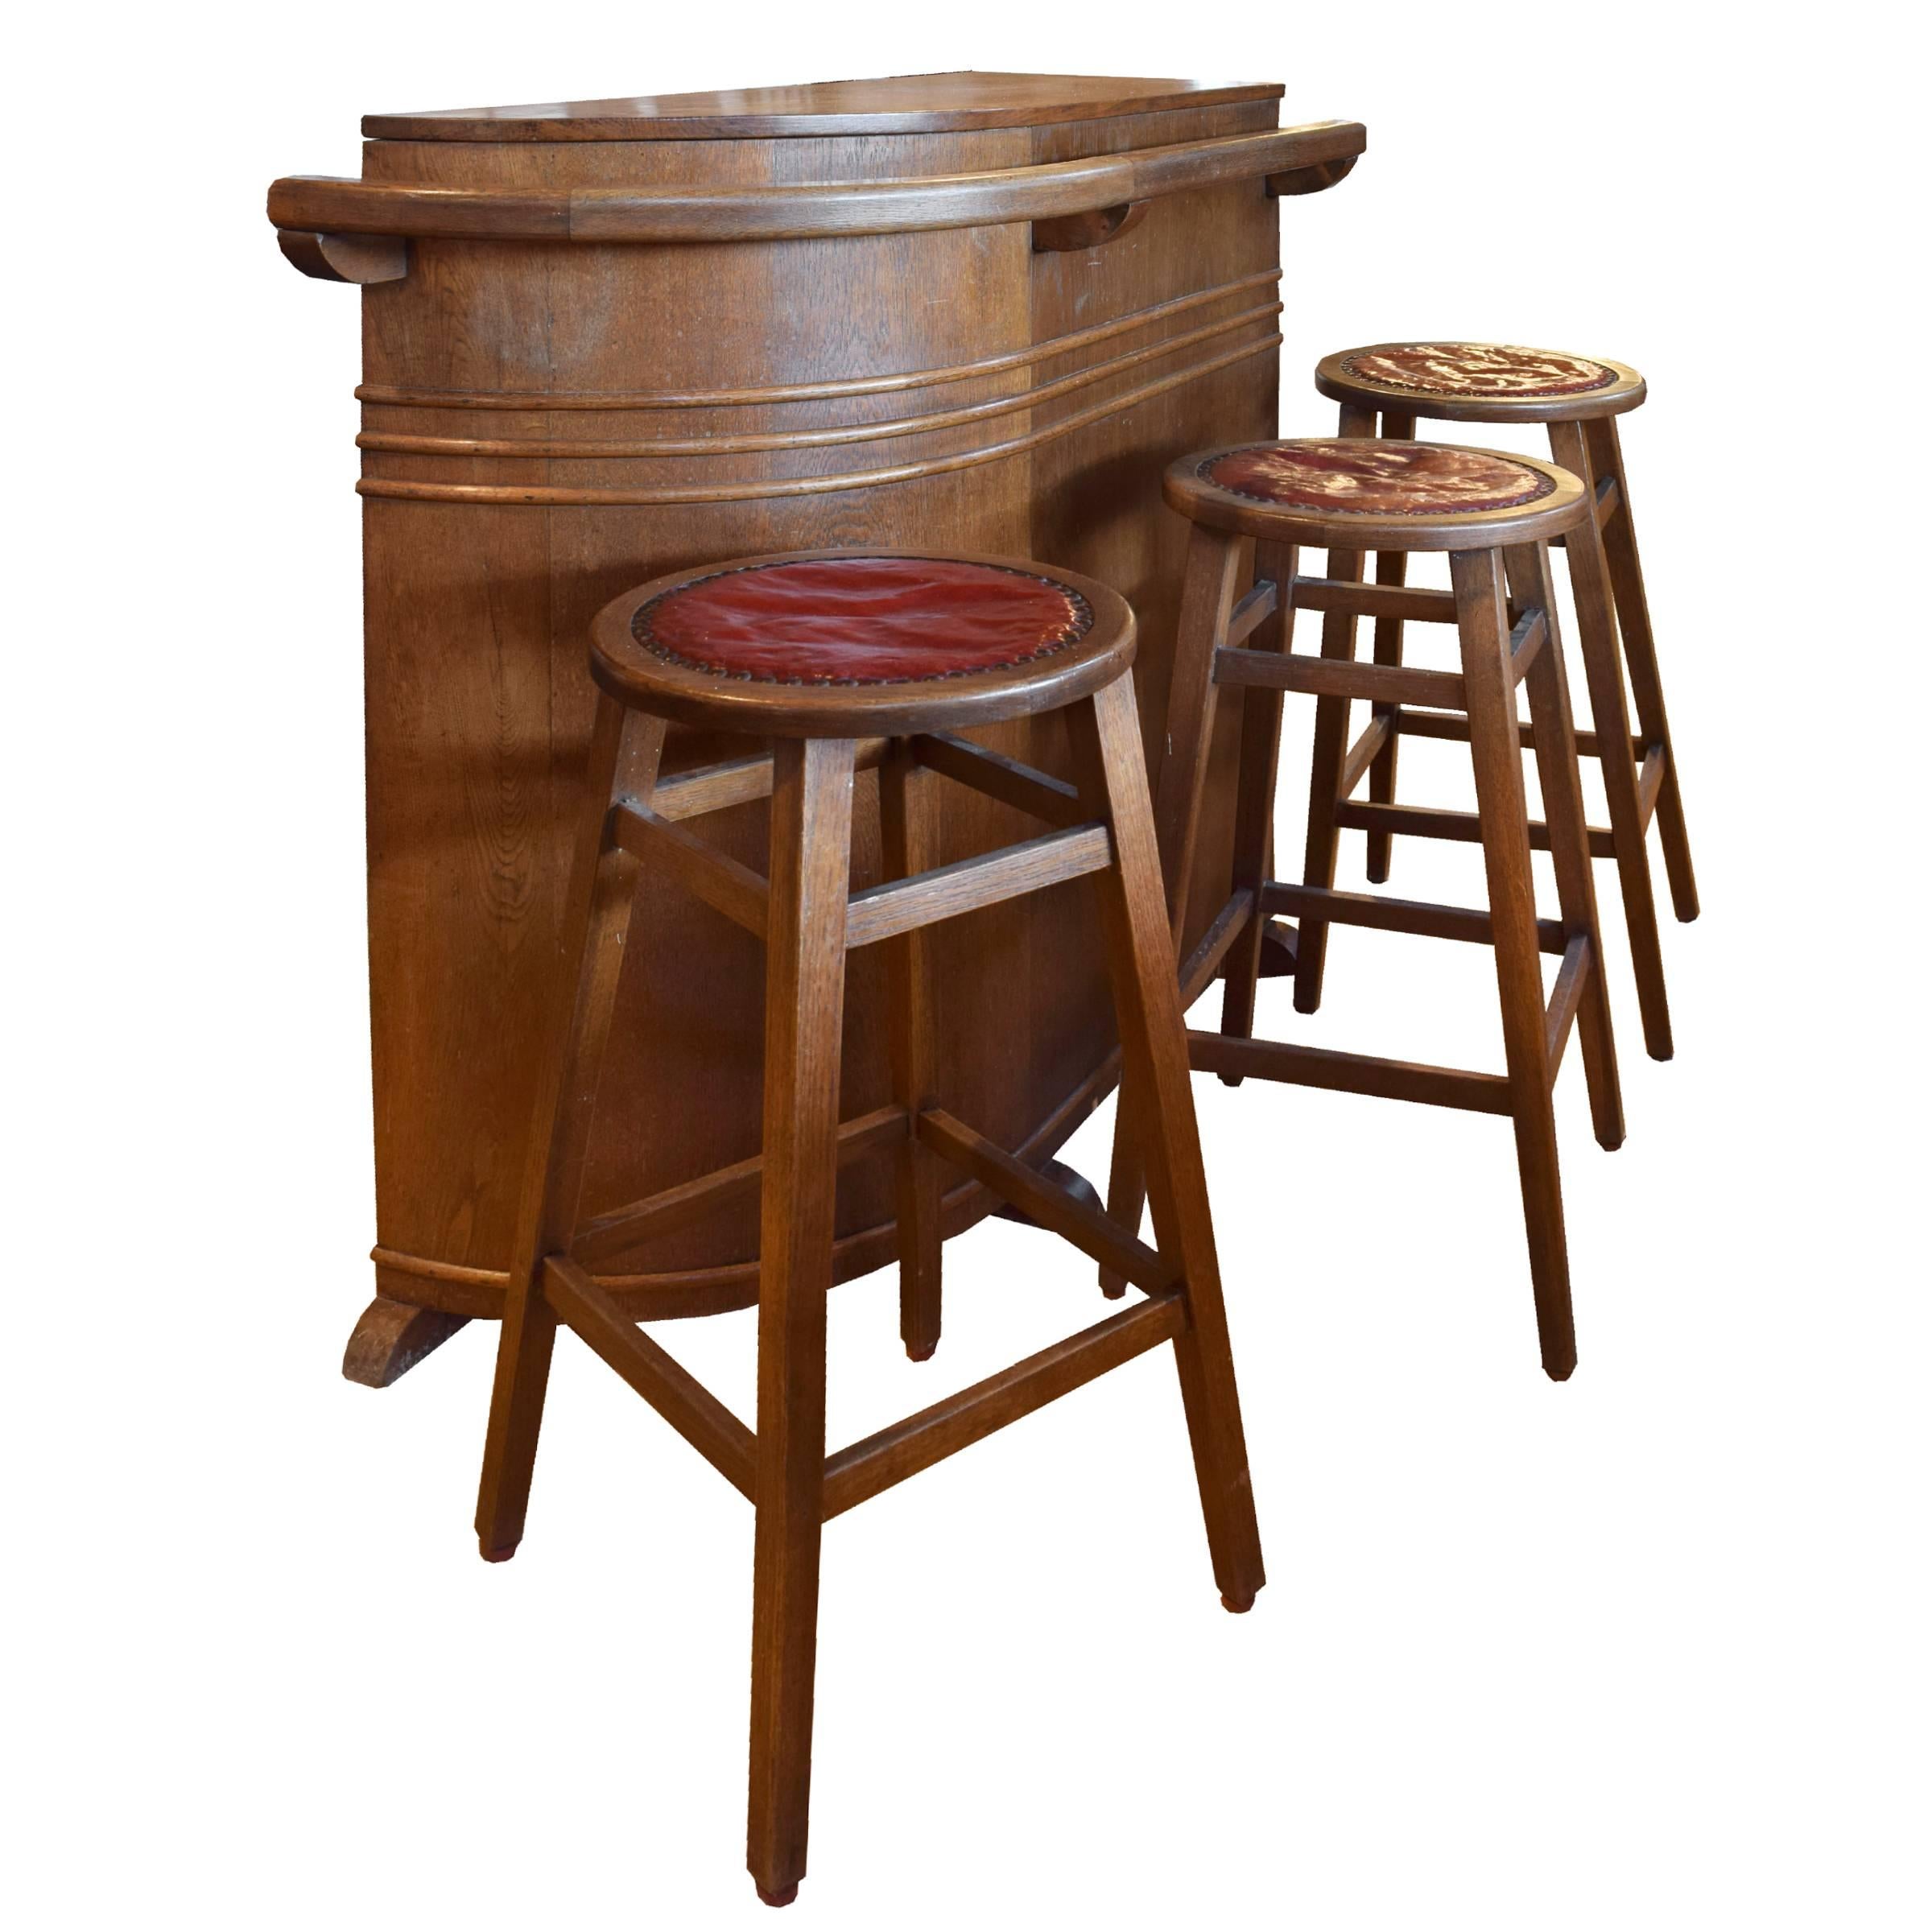 A fun French wood mid-century bar with a cool shape, shelves and storage in back, and three stools.
Stool height is 30 inches.